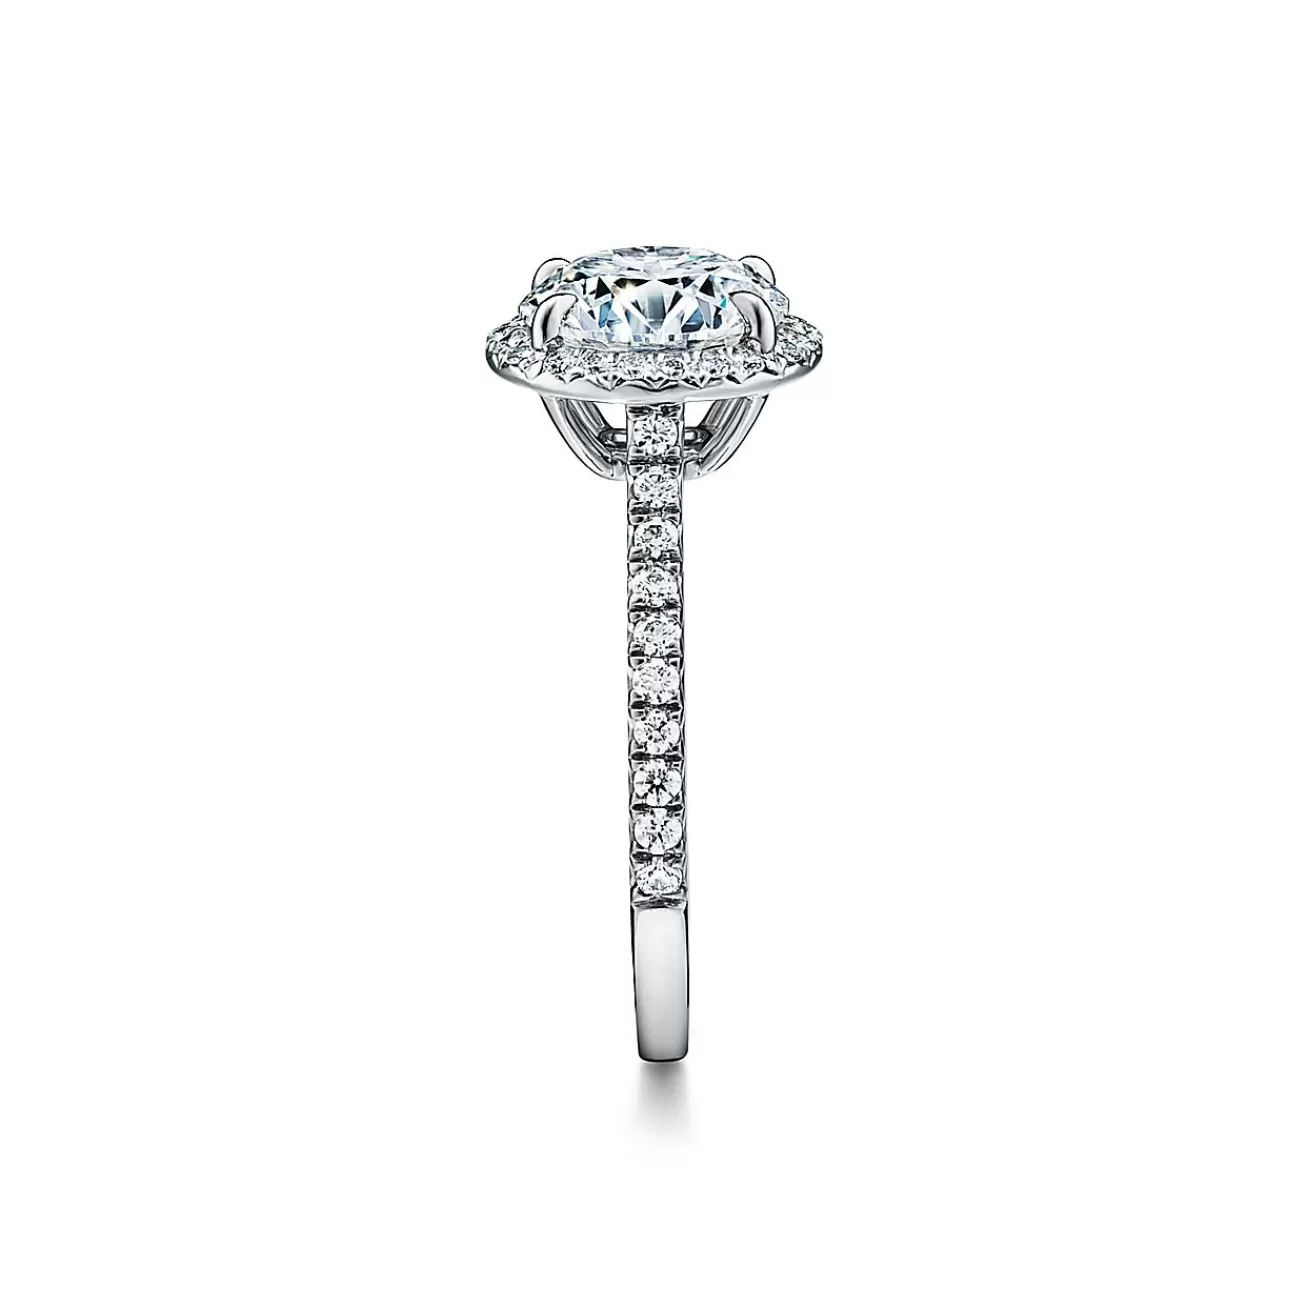 Tiffany & Co. Tiffany Soleste® round brilliant engagement ring in platinum. | ^ Engagement Rings